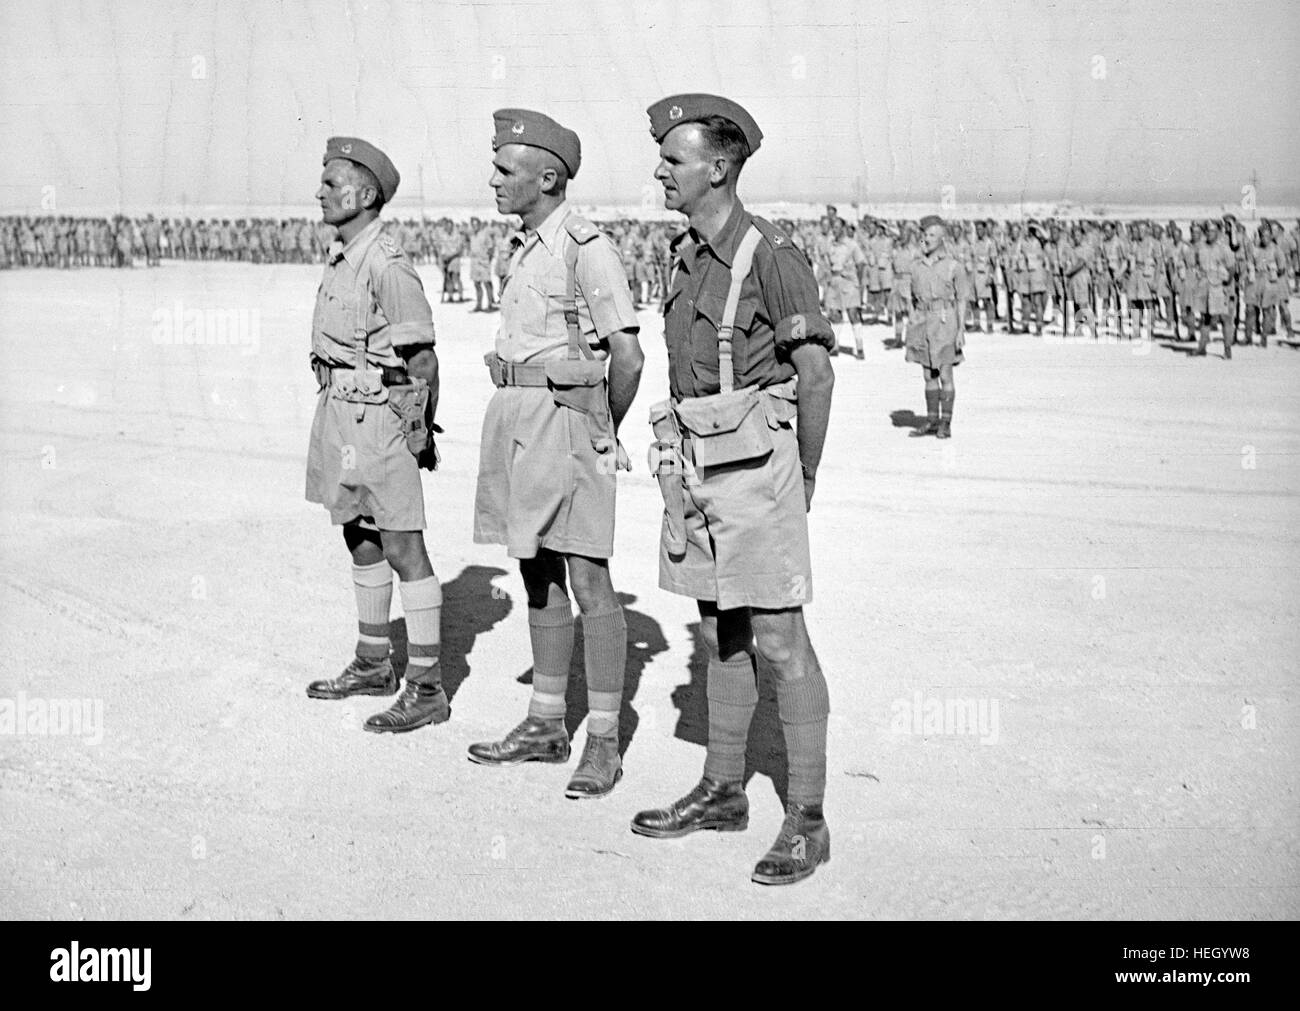 CHARLES UPHAM (       ) VC & Bar at an awards ceremony for three New Zealand soldiers at Baggush 35 miles east of Mersa Matruh in the Western Desert, 4 November 1941. From left: Lt Charles Upham; Lt Col Howard Kippenberger; Major Raymond Lynch.  Photo: New Zealand Official Stock Photo